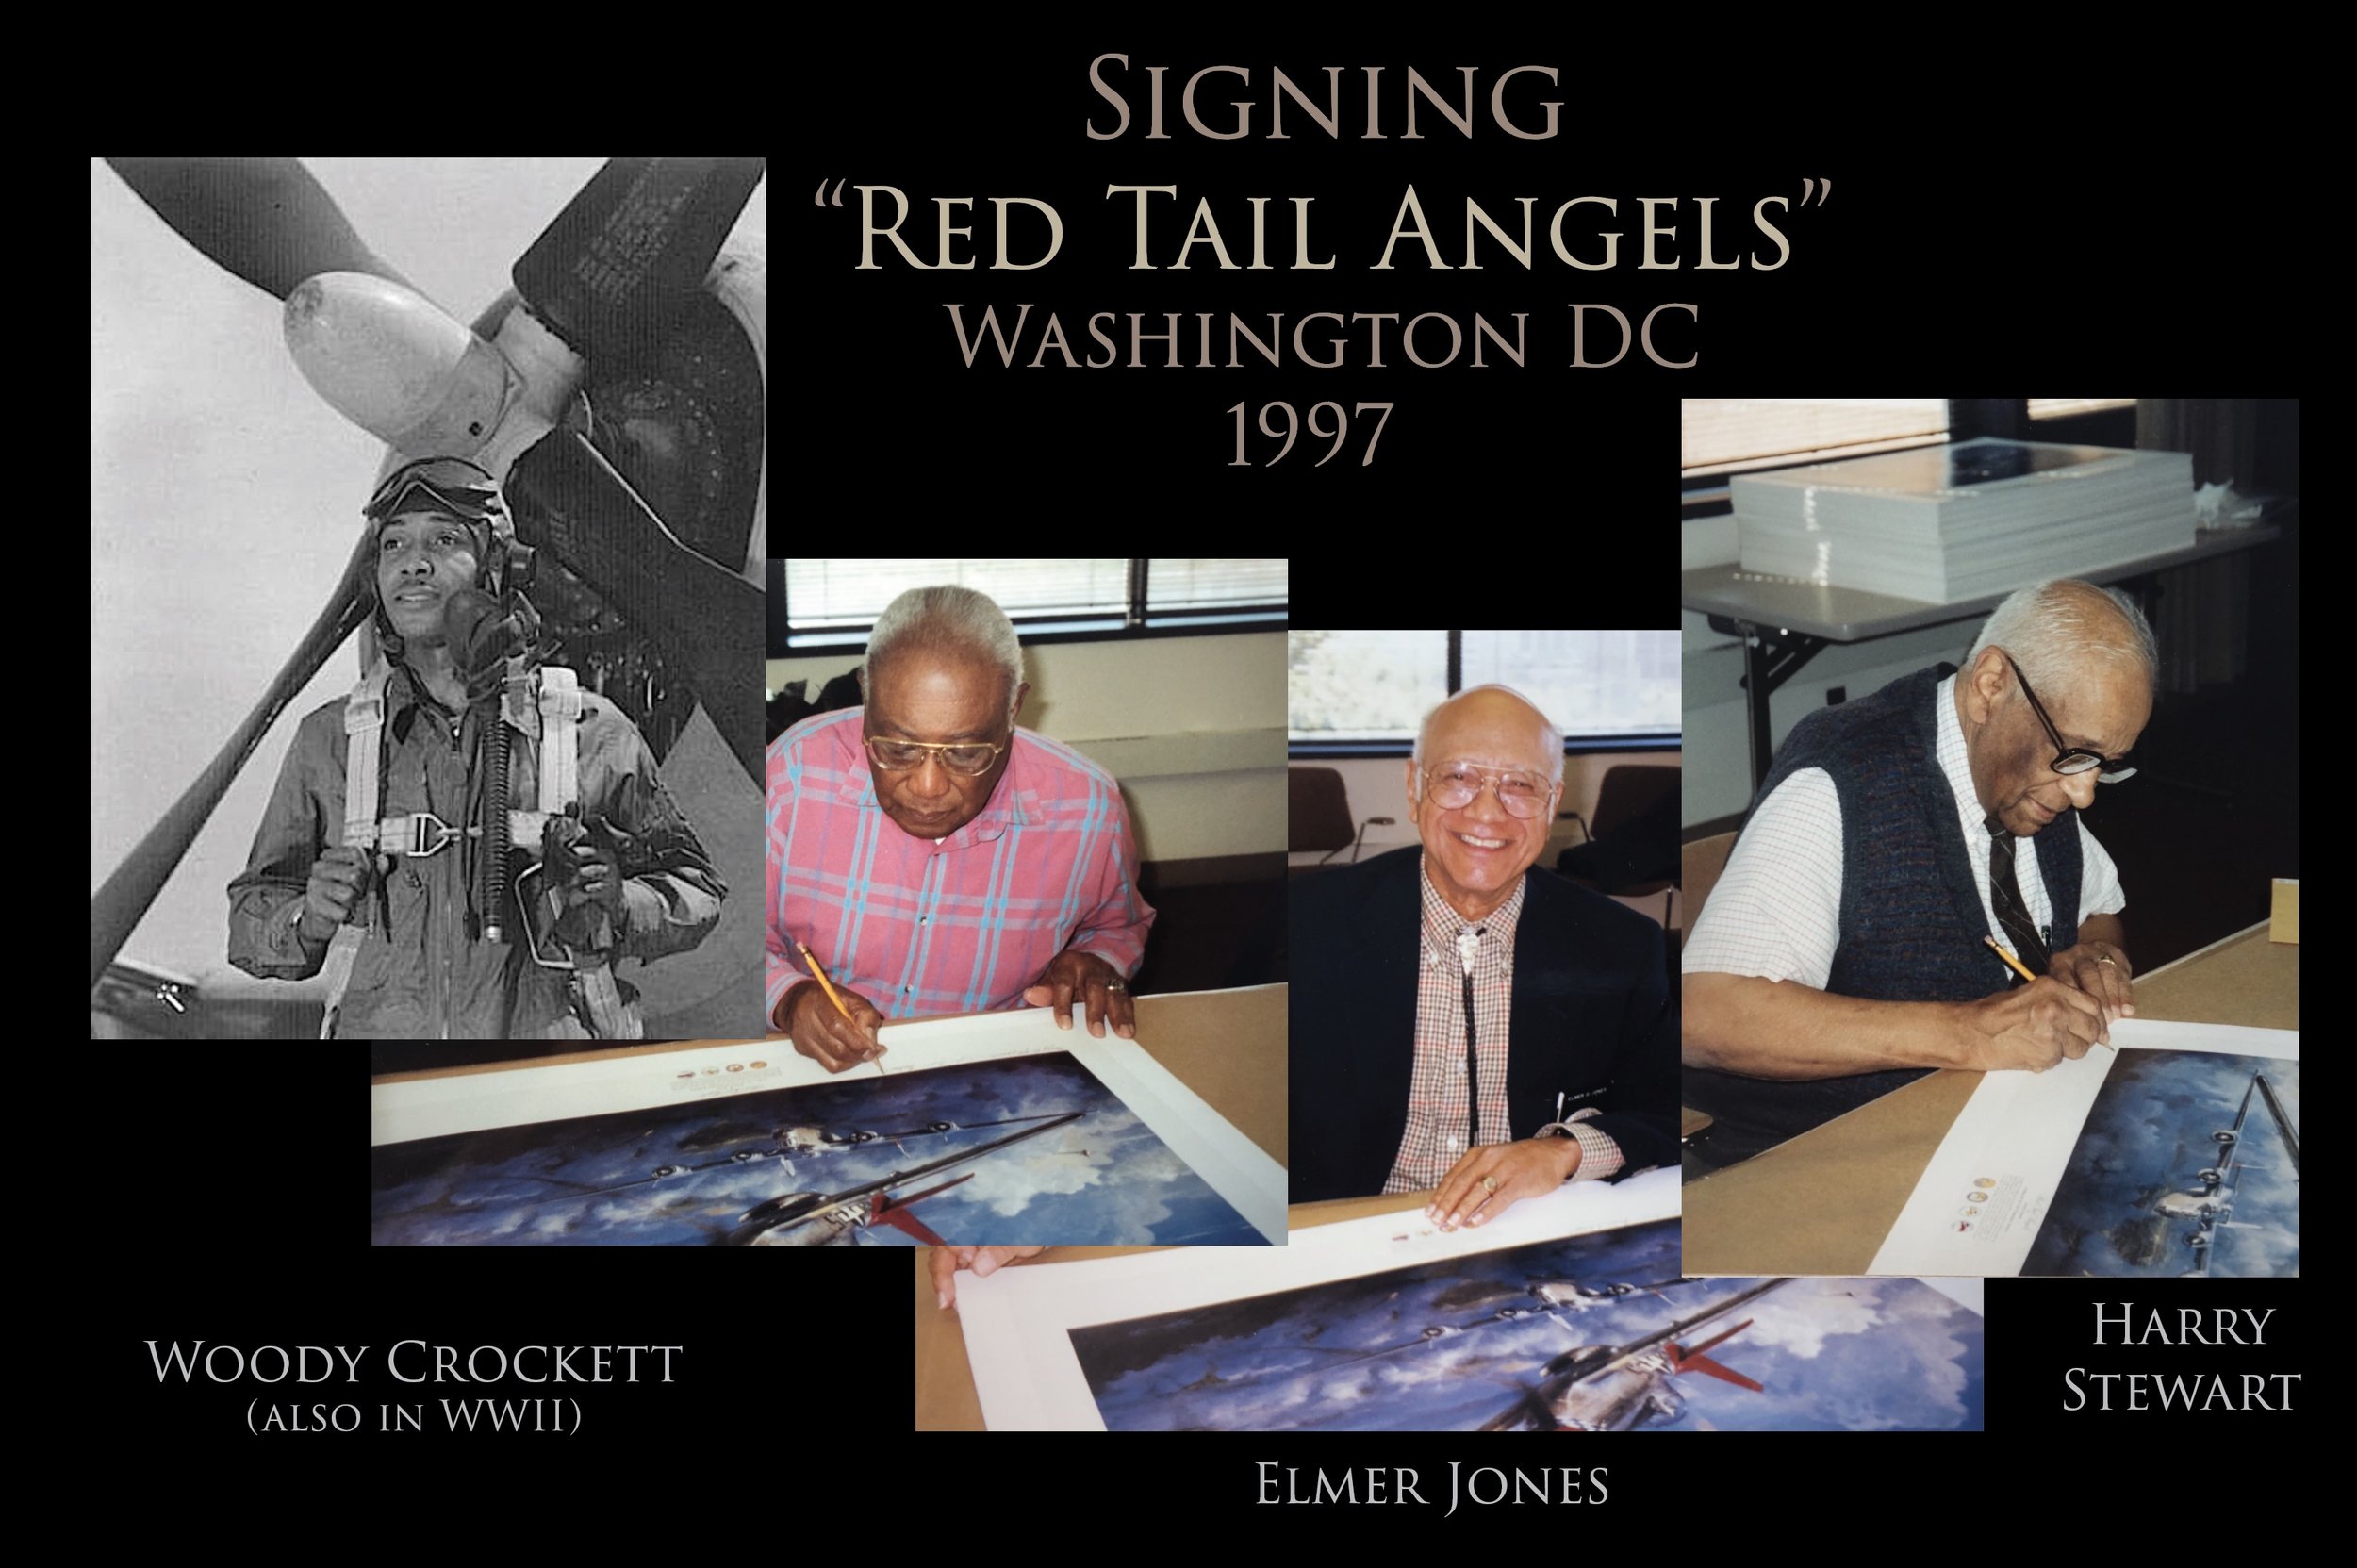  A few more of the great guys who were signing ‘Red Tail Angels’ in Washington…  Woody Crockett , Elmer Jones and Harry Sheppard.&nbsp;    